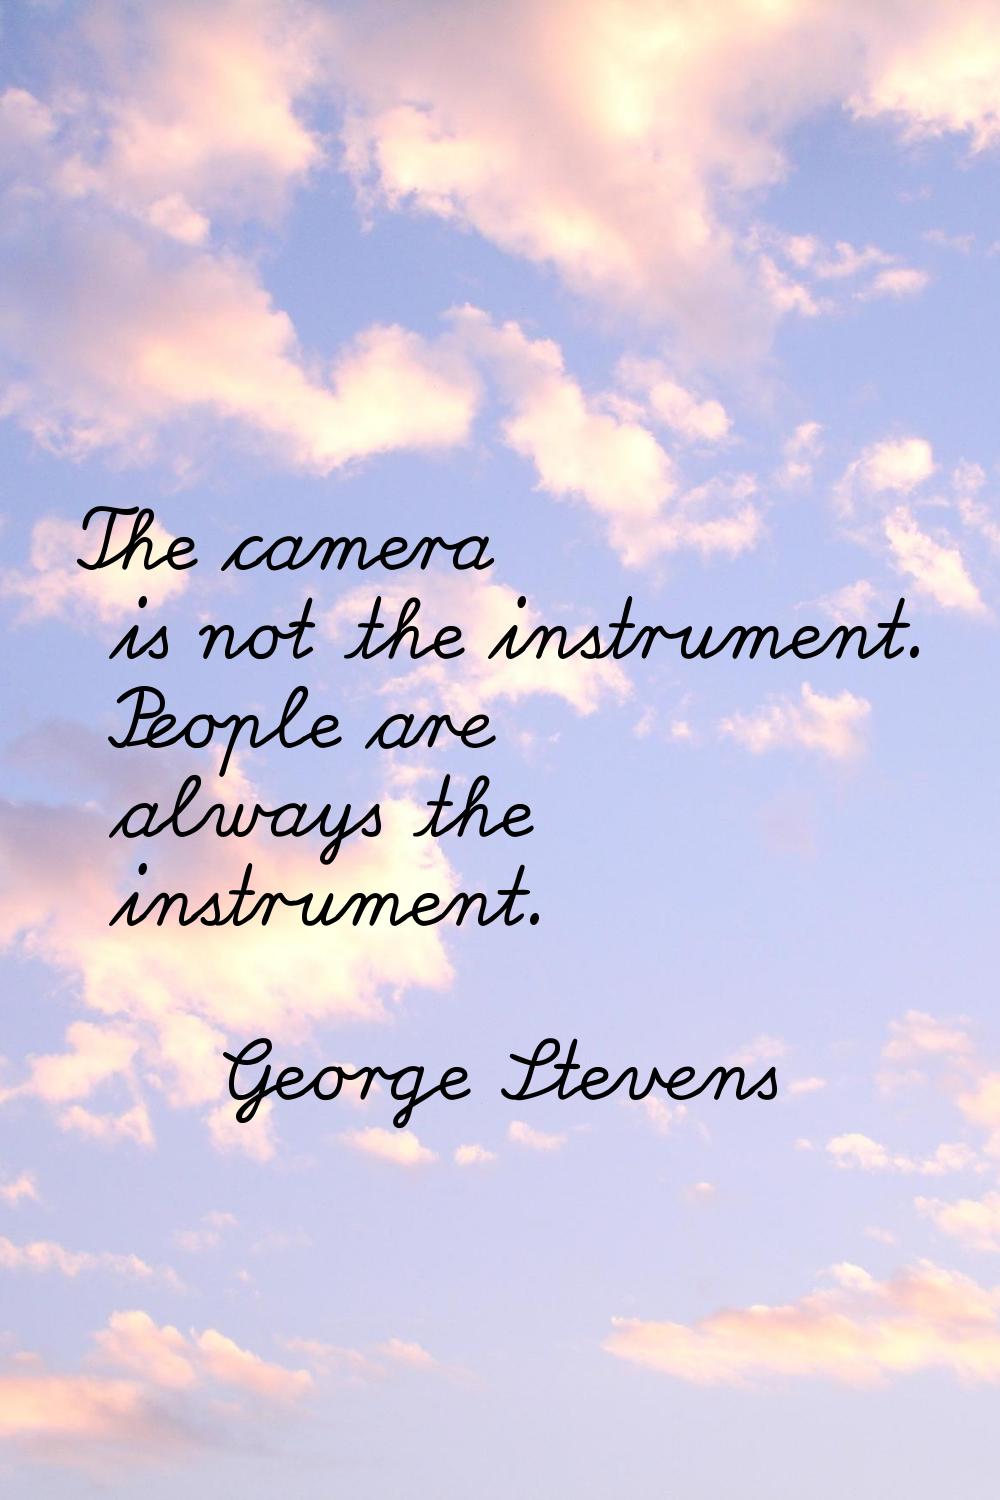 The camera is not the instrument. People are always the instrument.